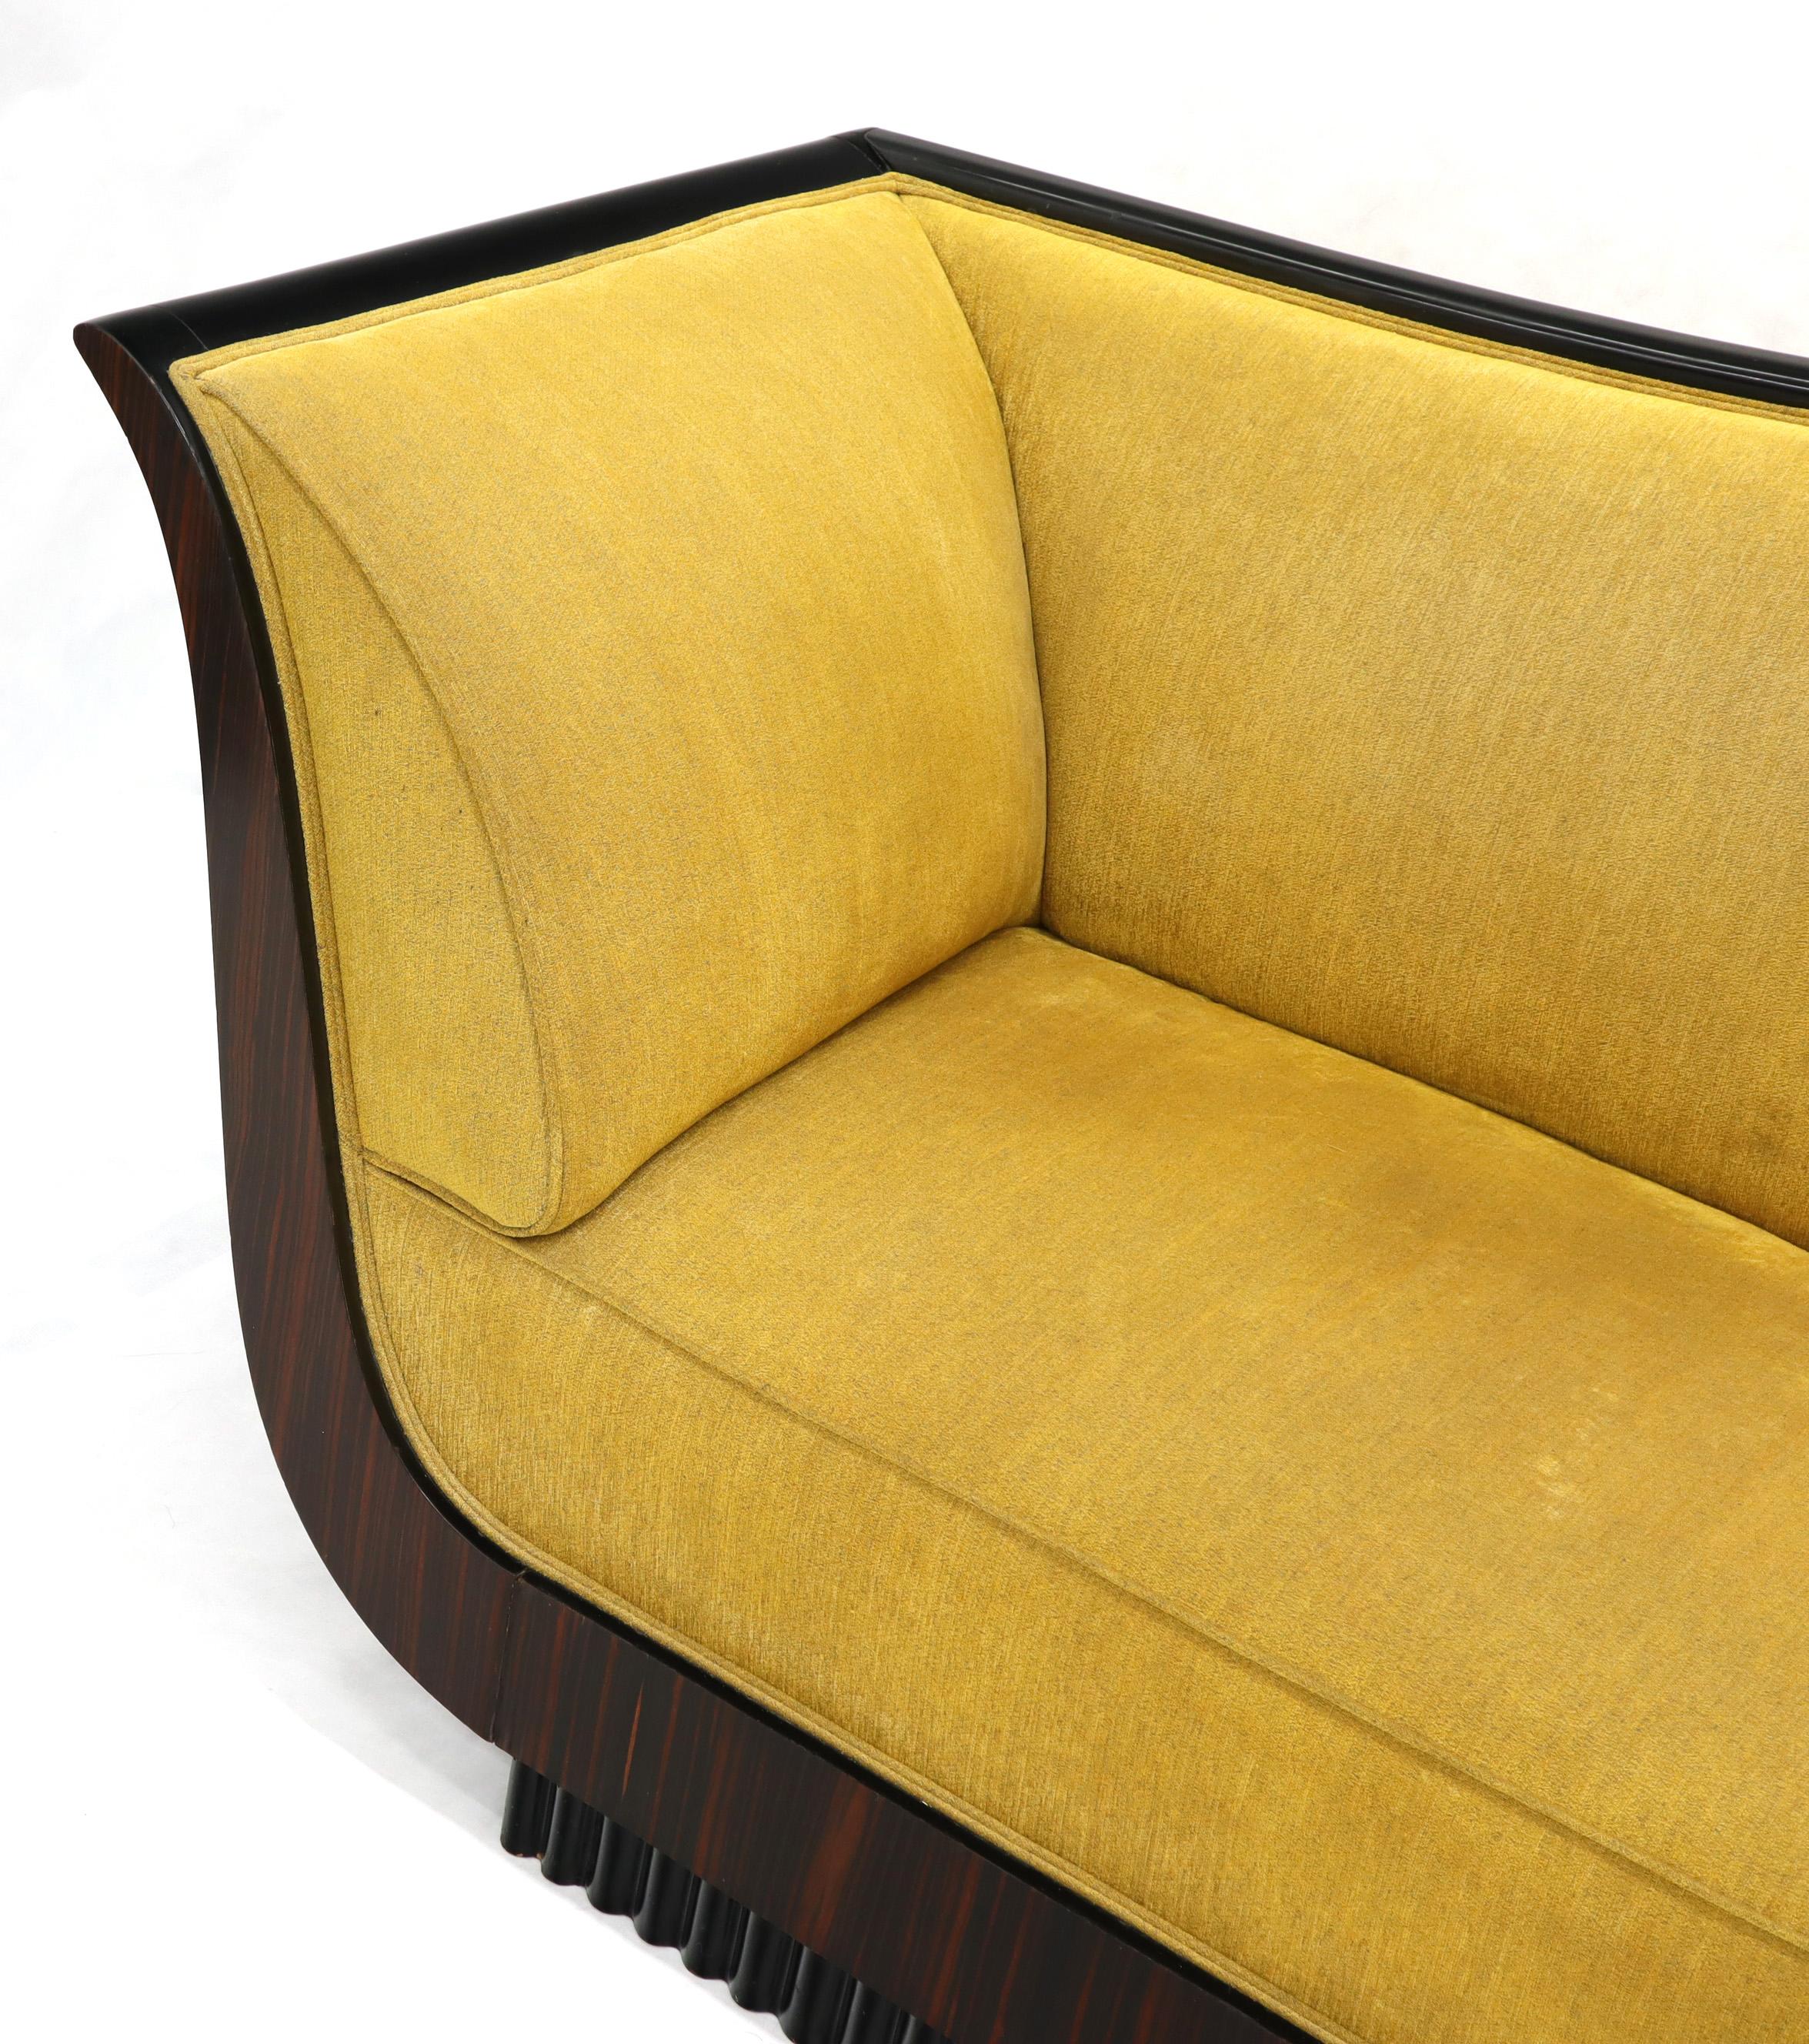 Lacquered Large French Art Deco Rosewood Sofa in Gold Upholstery Scalloped Edge For Sale